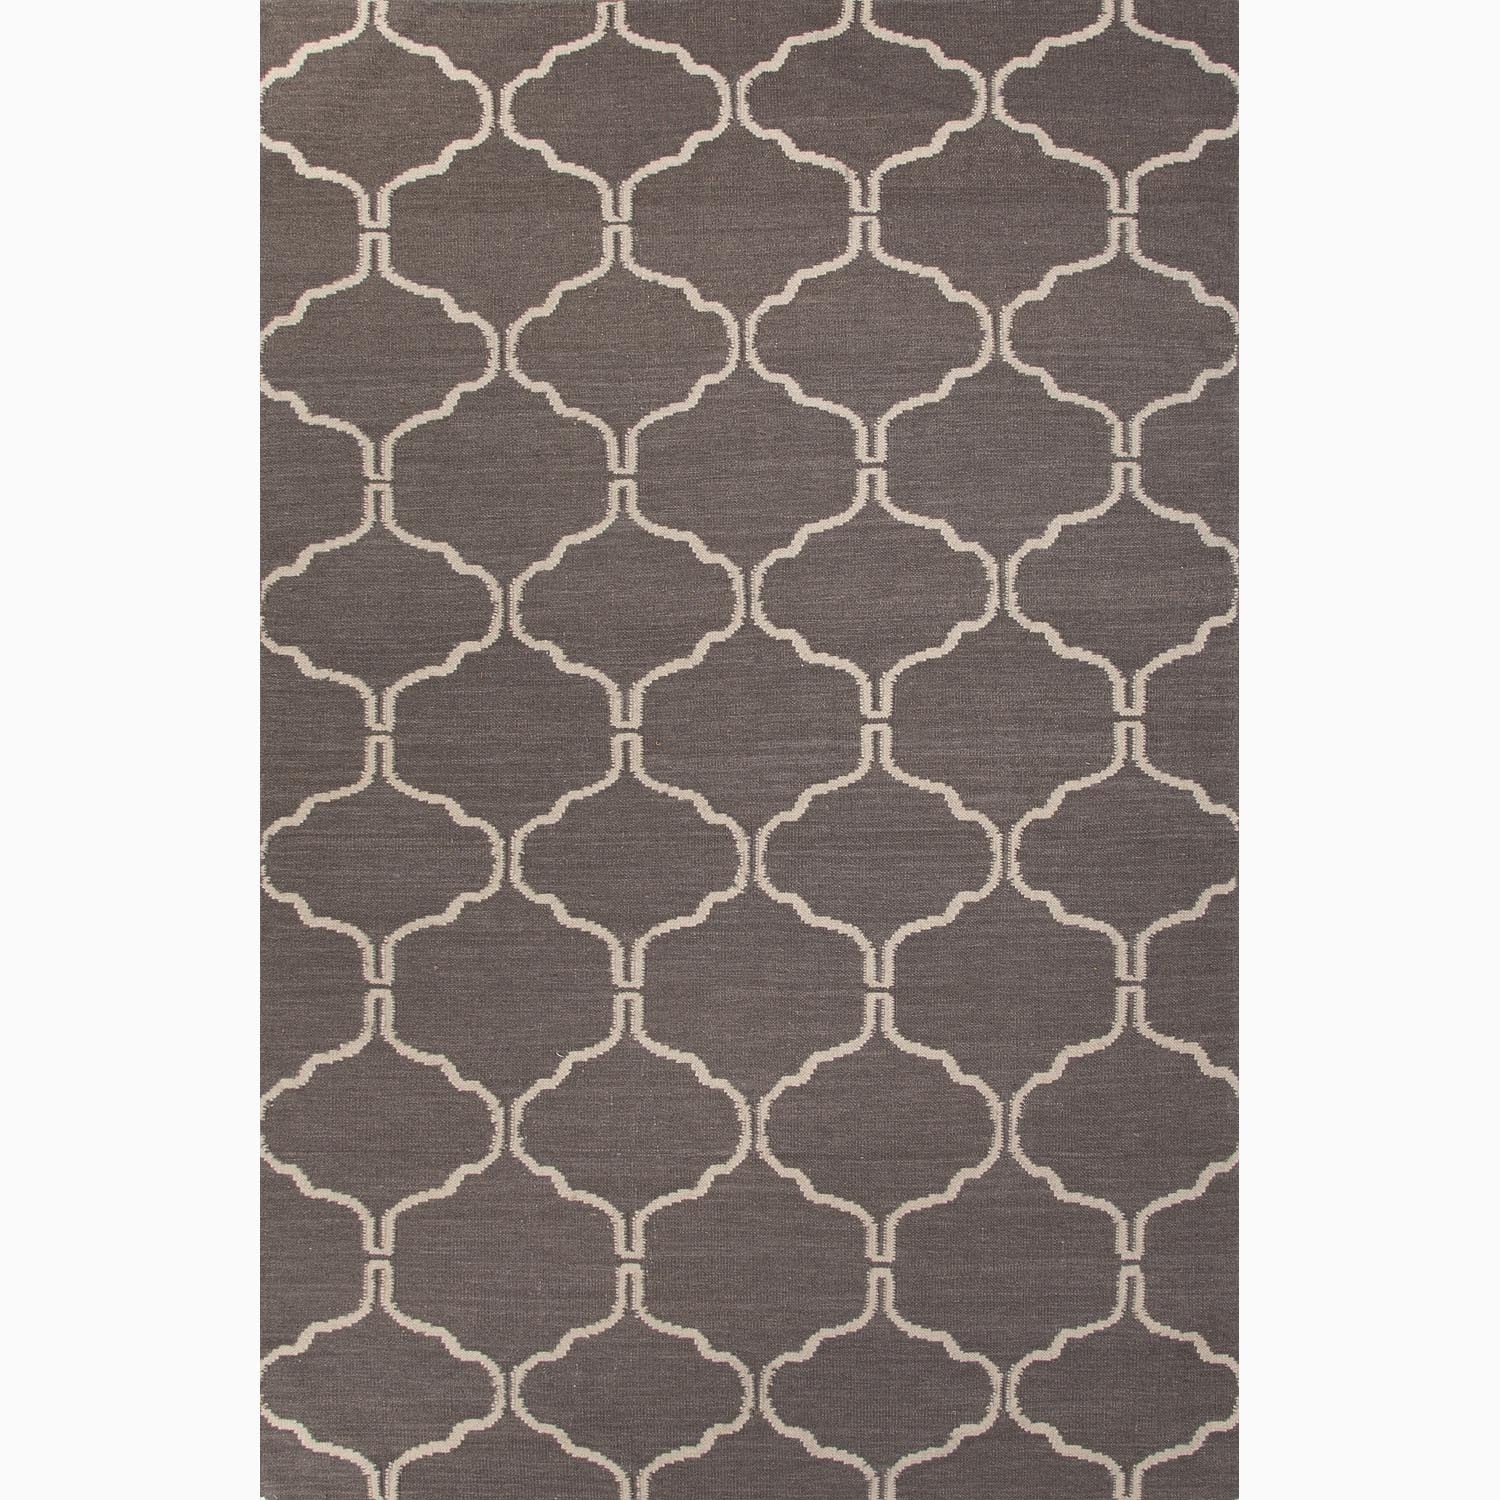 Hand made Moroccan Pattern Gray/ Ivory Wool Rug (3.6x5.6)